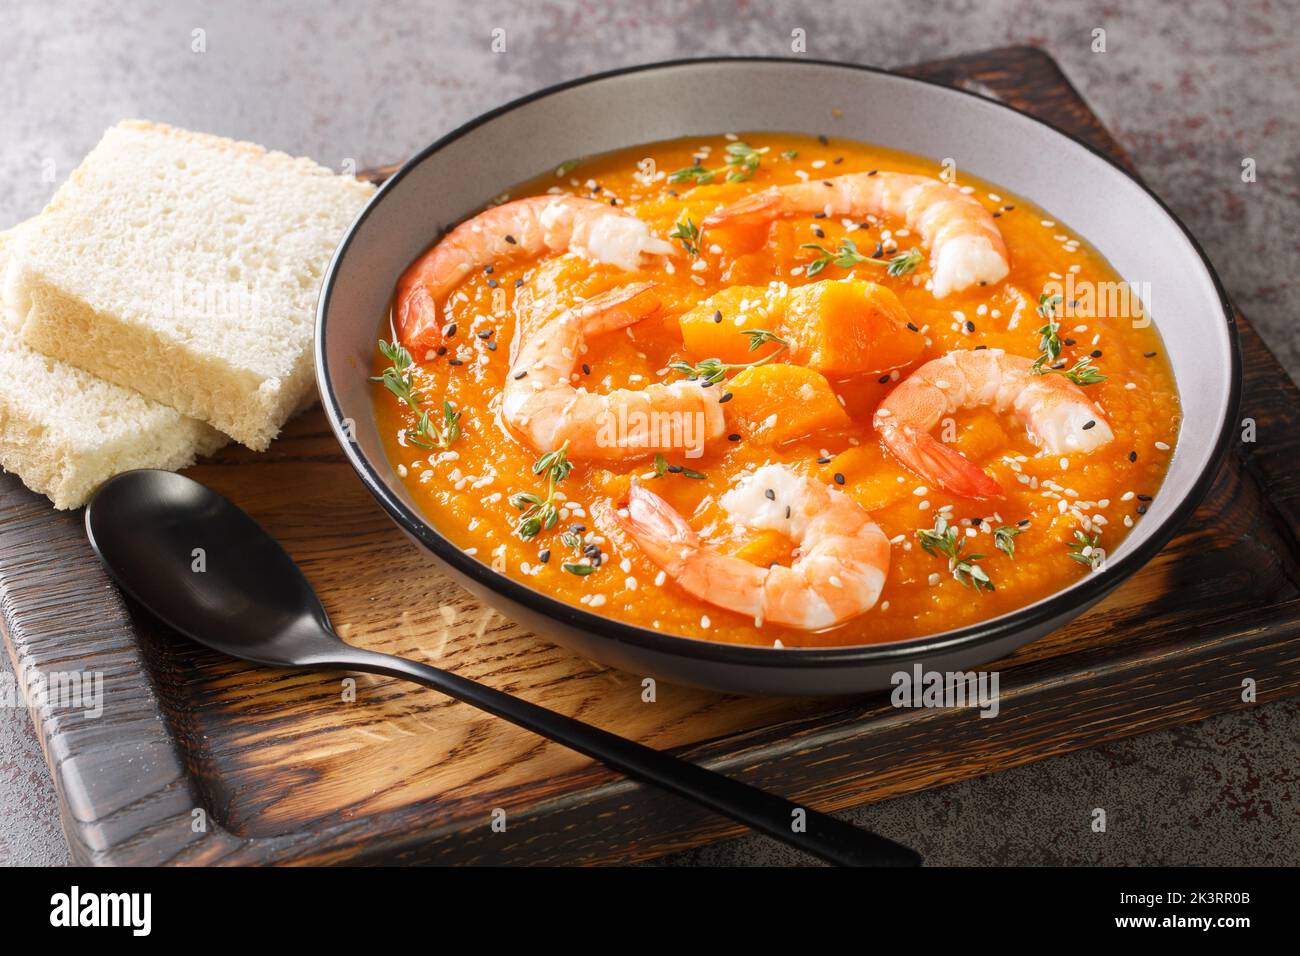 Pumpkin vegetable soup with shrimps, sesame seeds and thyme close-up on a wooden tray on the table. Horizontal Stock Photo